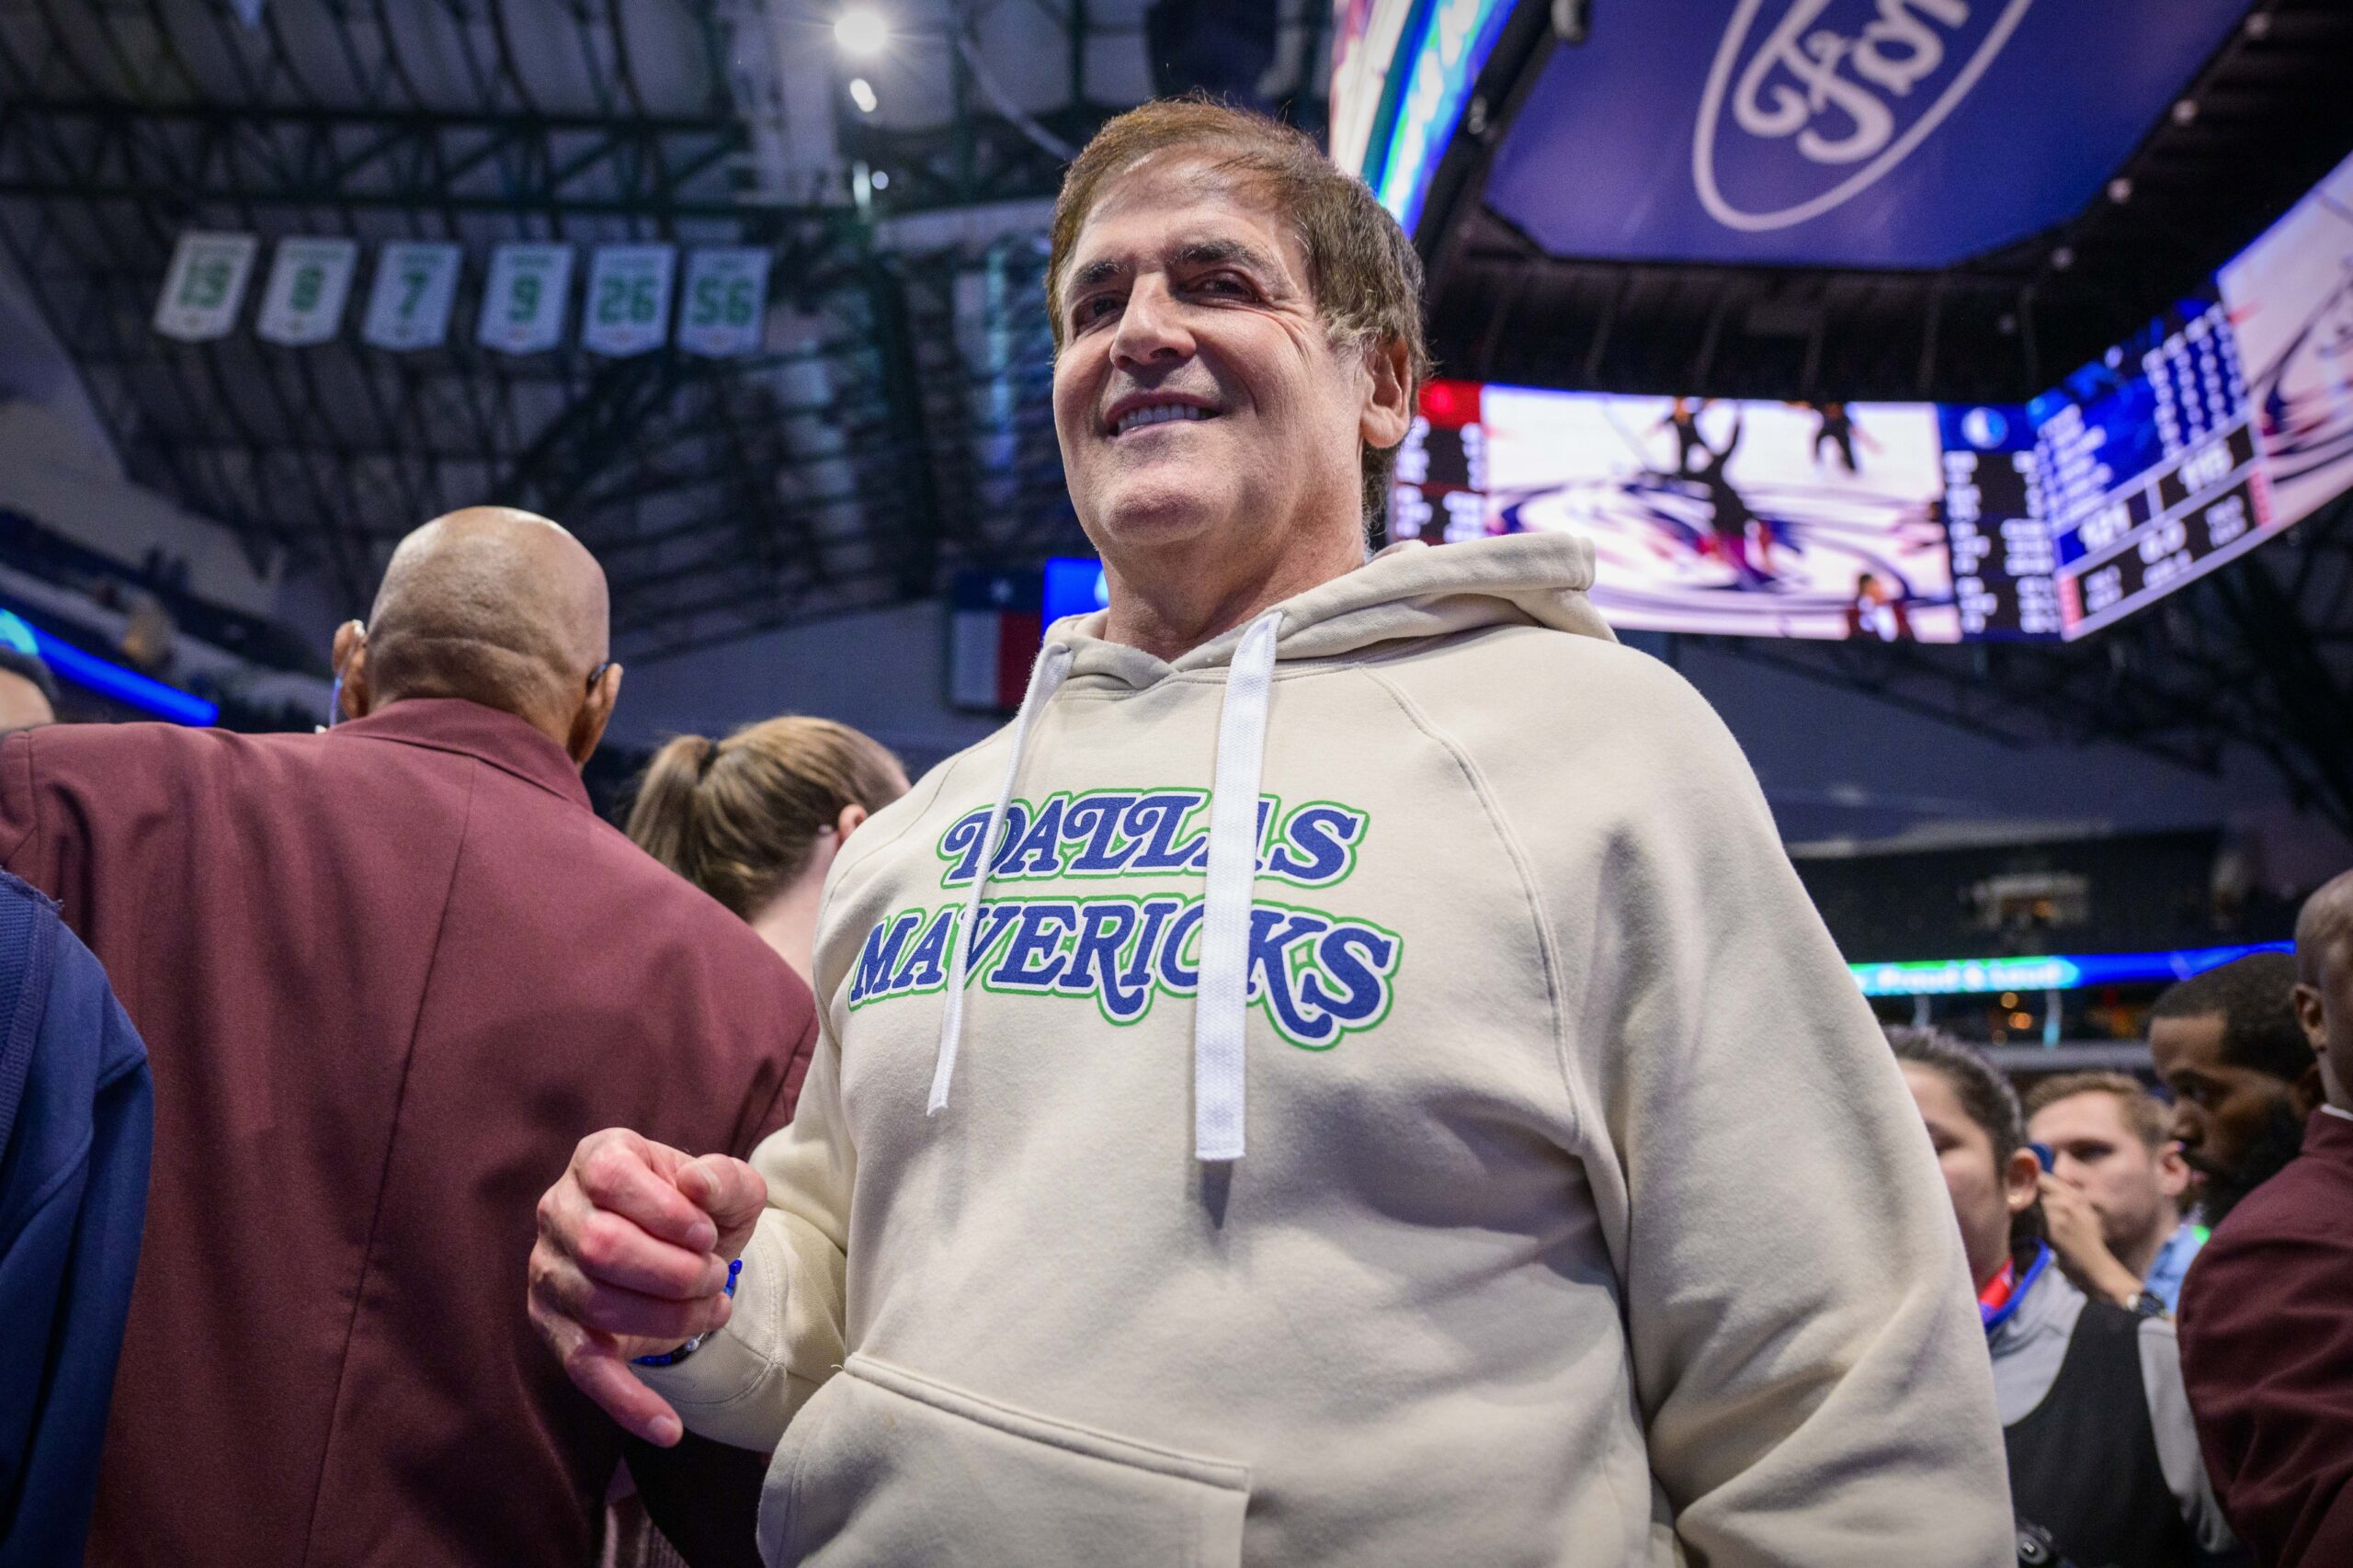 Dallas Mavericks owner Mark Cuban walks off the court after the Mavericks victory over the Houston Rockets at the American Airlines Center.